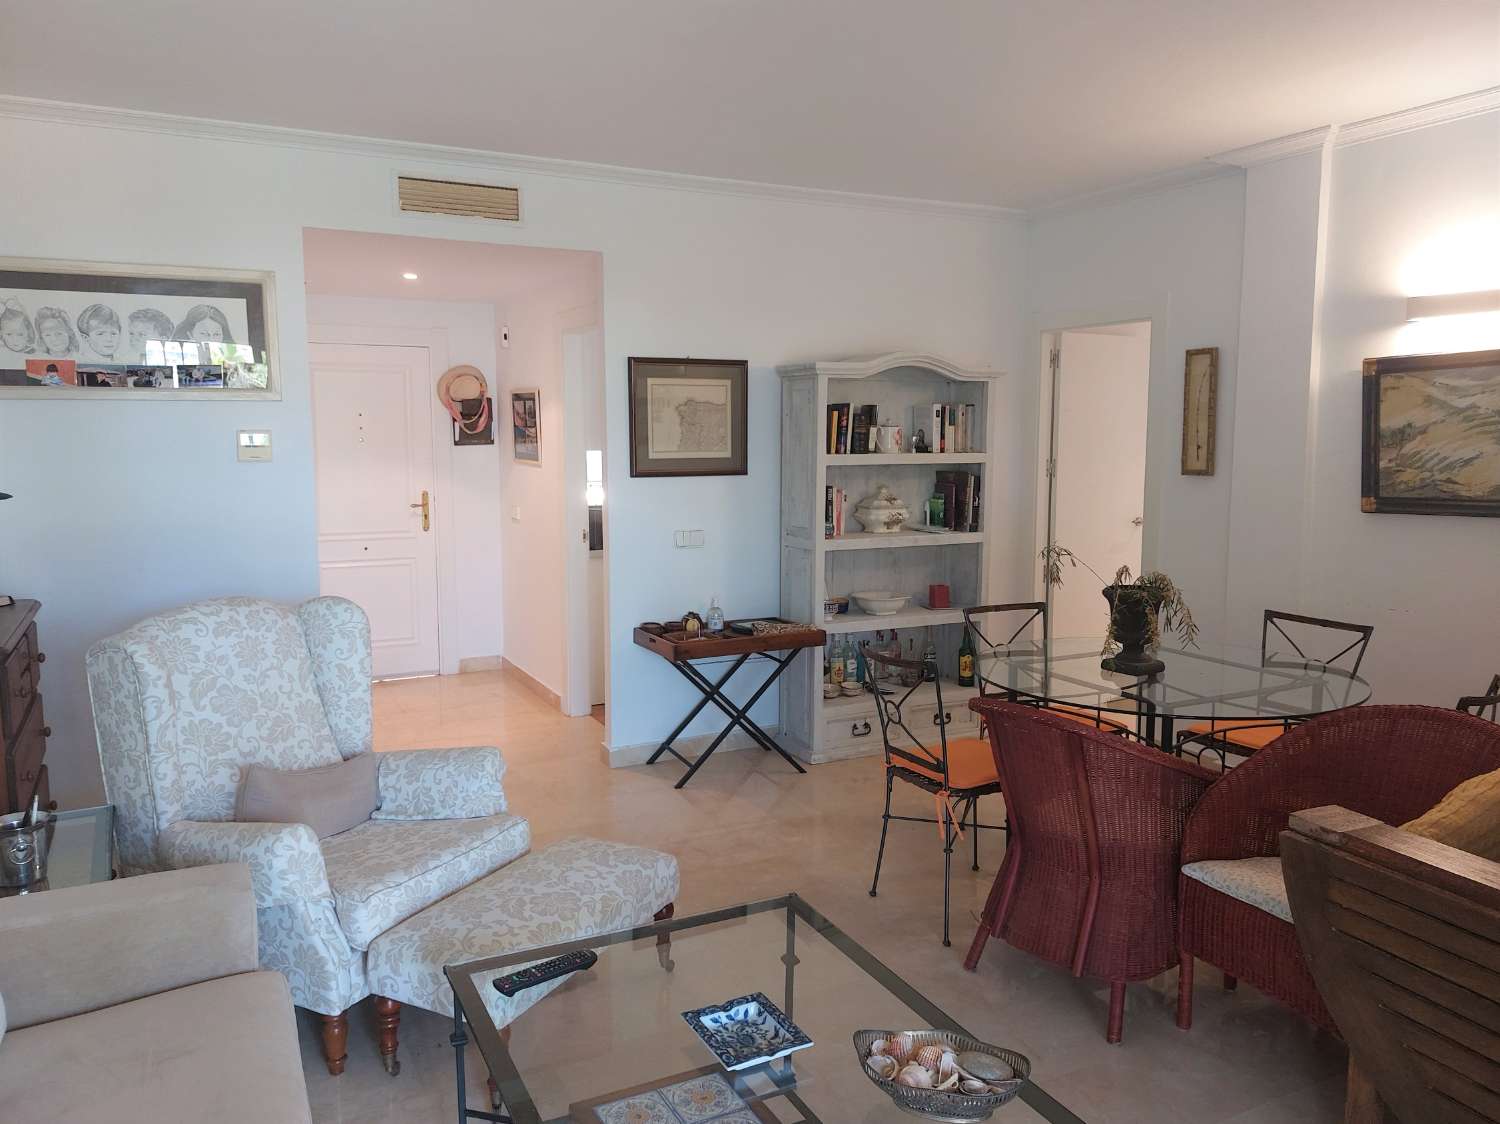 Wonderfull garden apartment in a peaceful and upscale gated community in La Quinta.